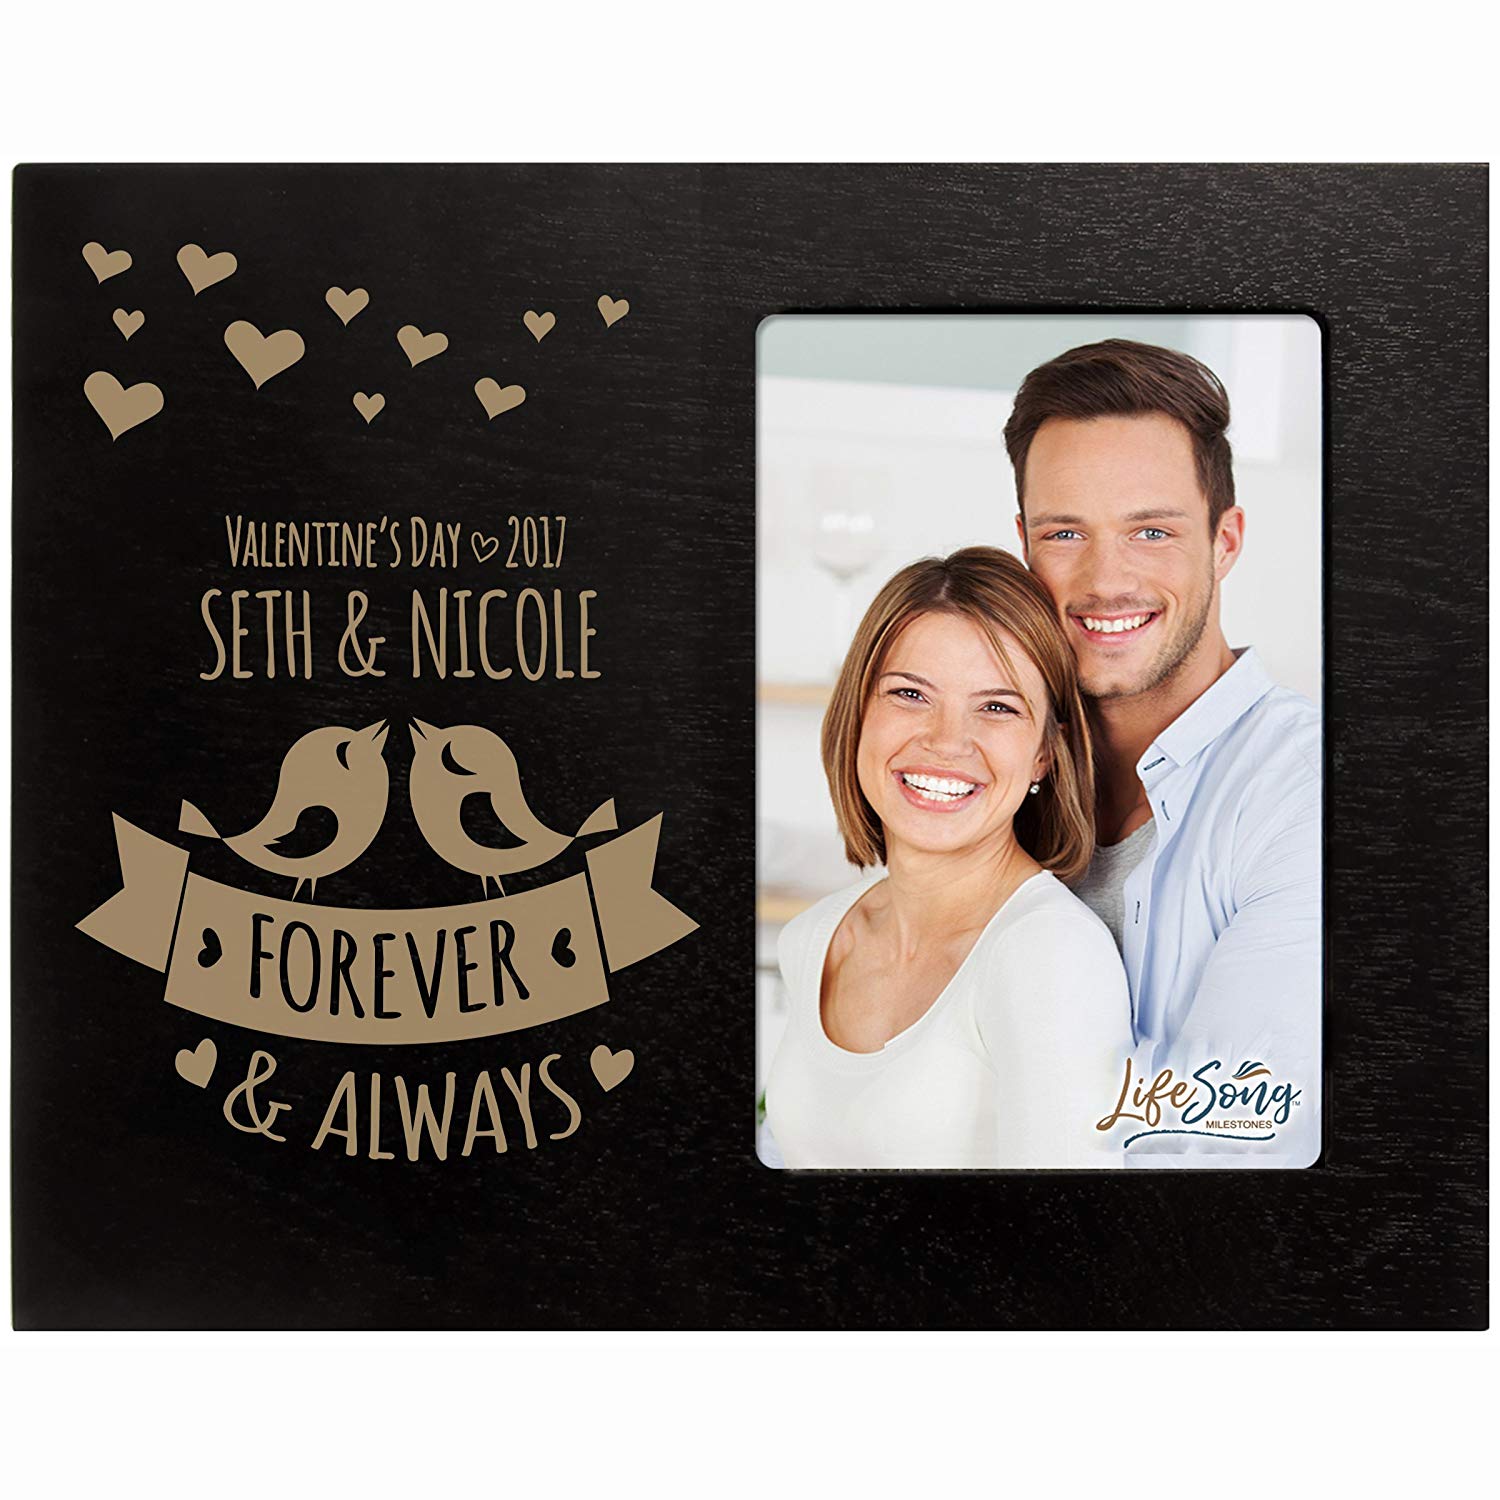 Personalized Valentine's Day Photo Frame - Forever & Always - LifeSong Milestones